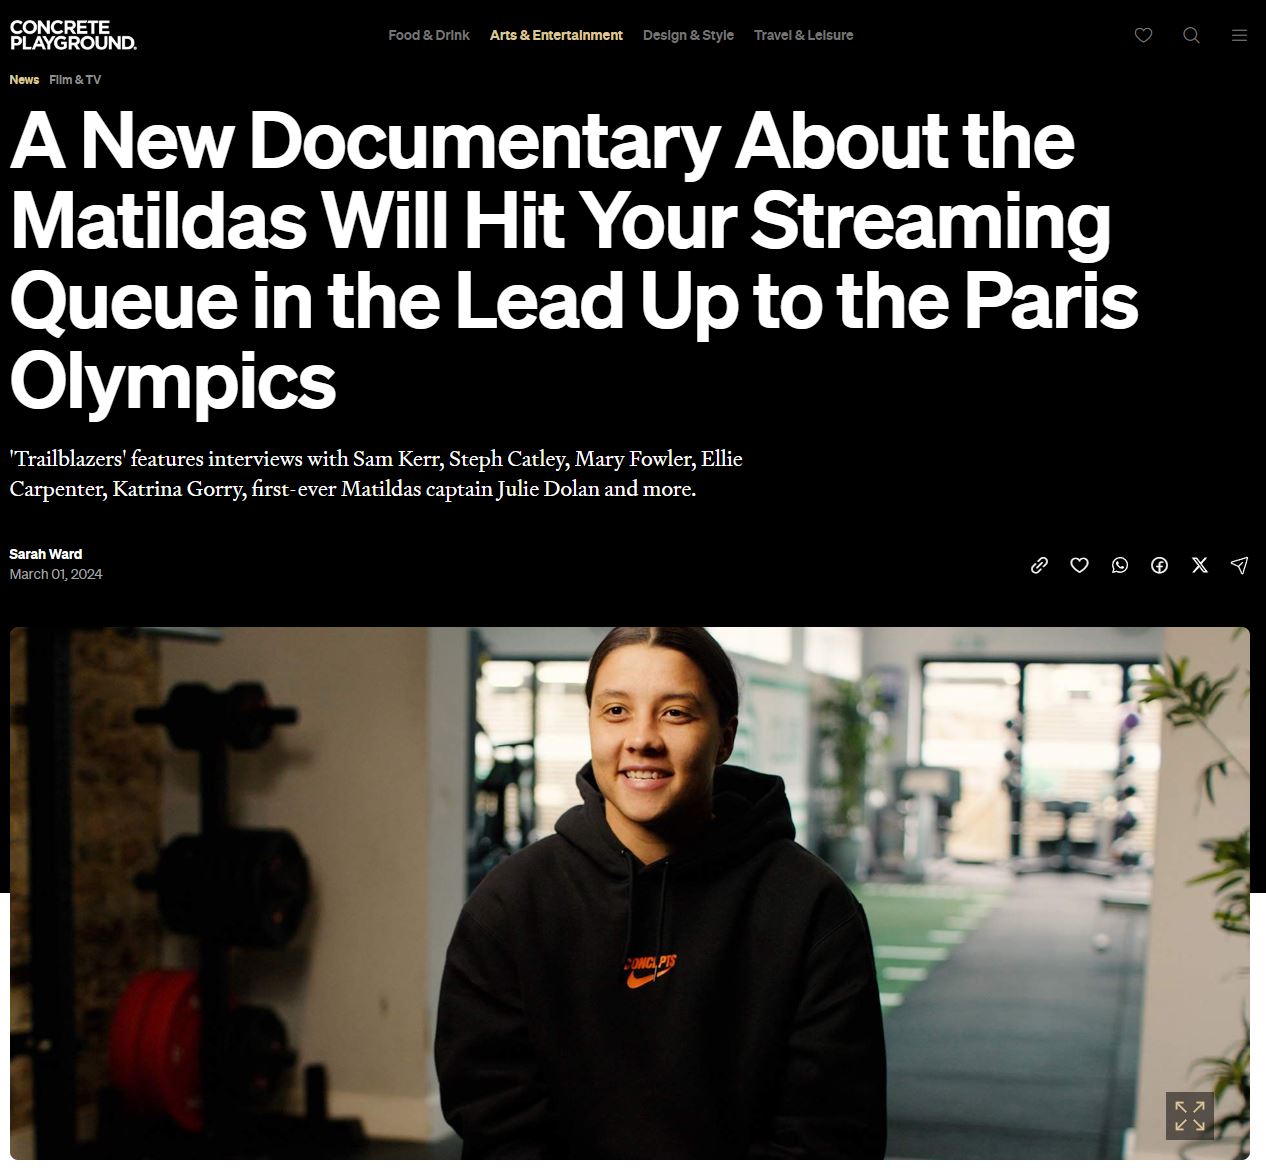 A New Documentary About the Matildas Will Hit Your Streaming Queue in the Lead Up to the Paris Olympics